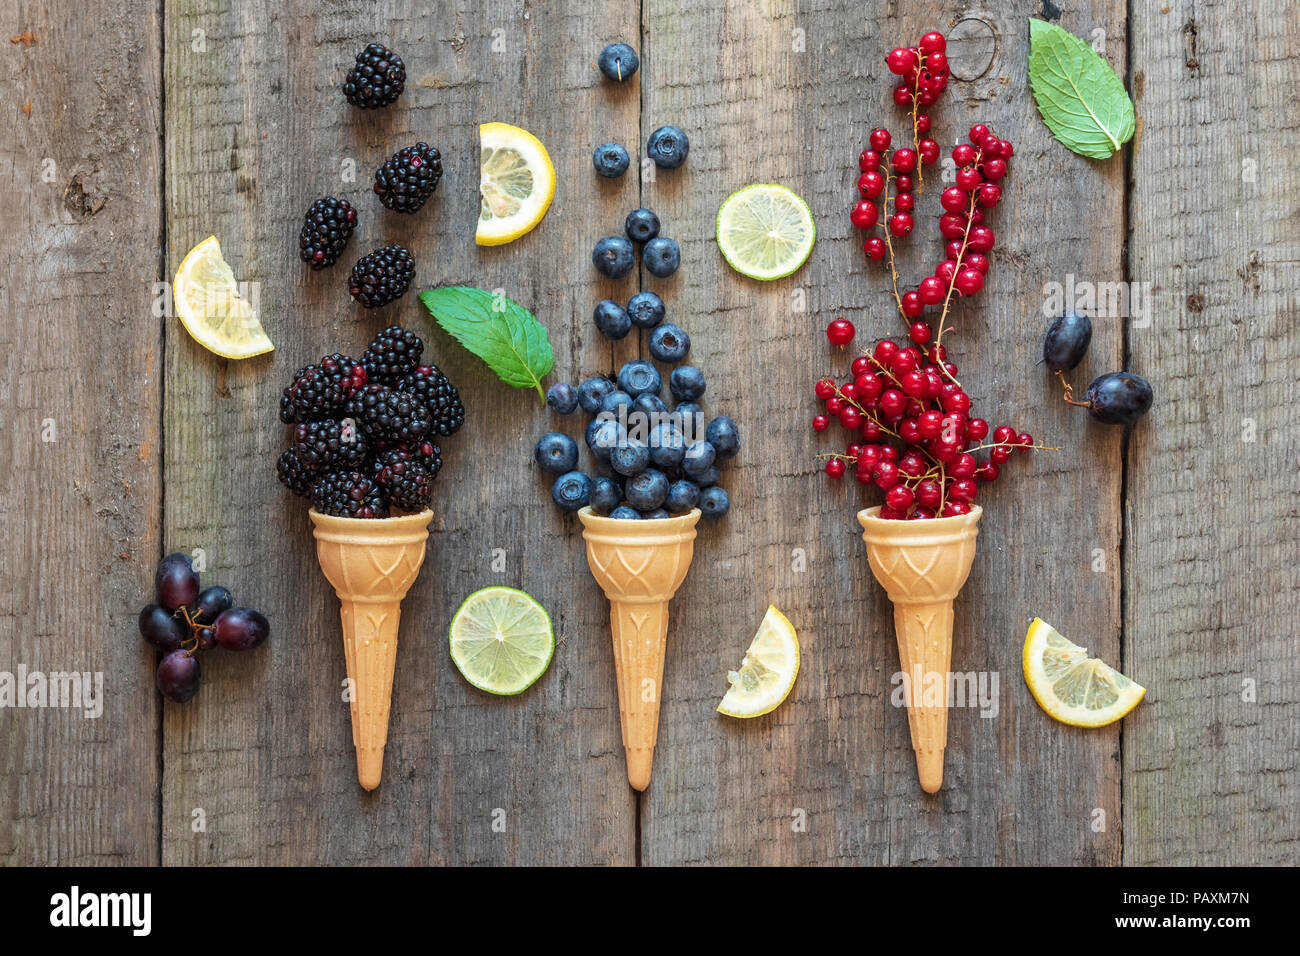 Berries in ice cream cones (blackberry, blueberry, redcurrant). Healthy summer food concept. Stock Photo